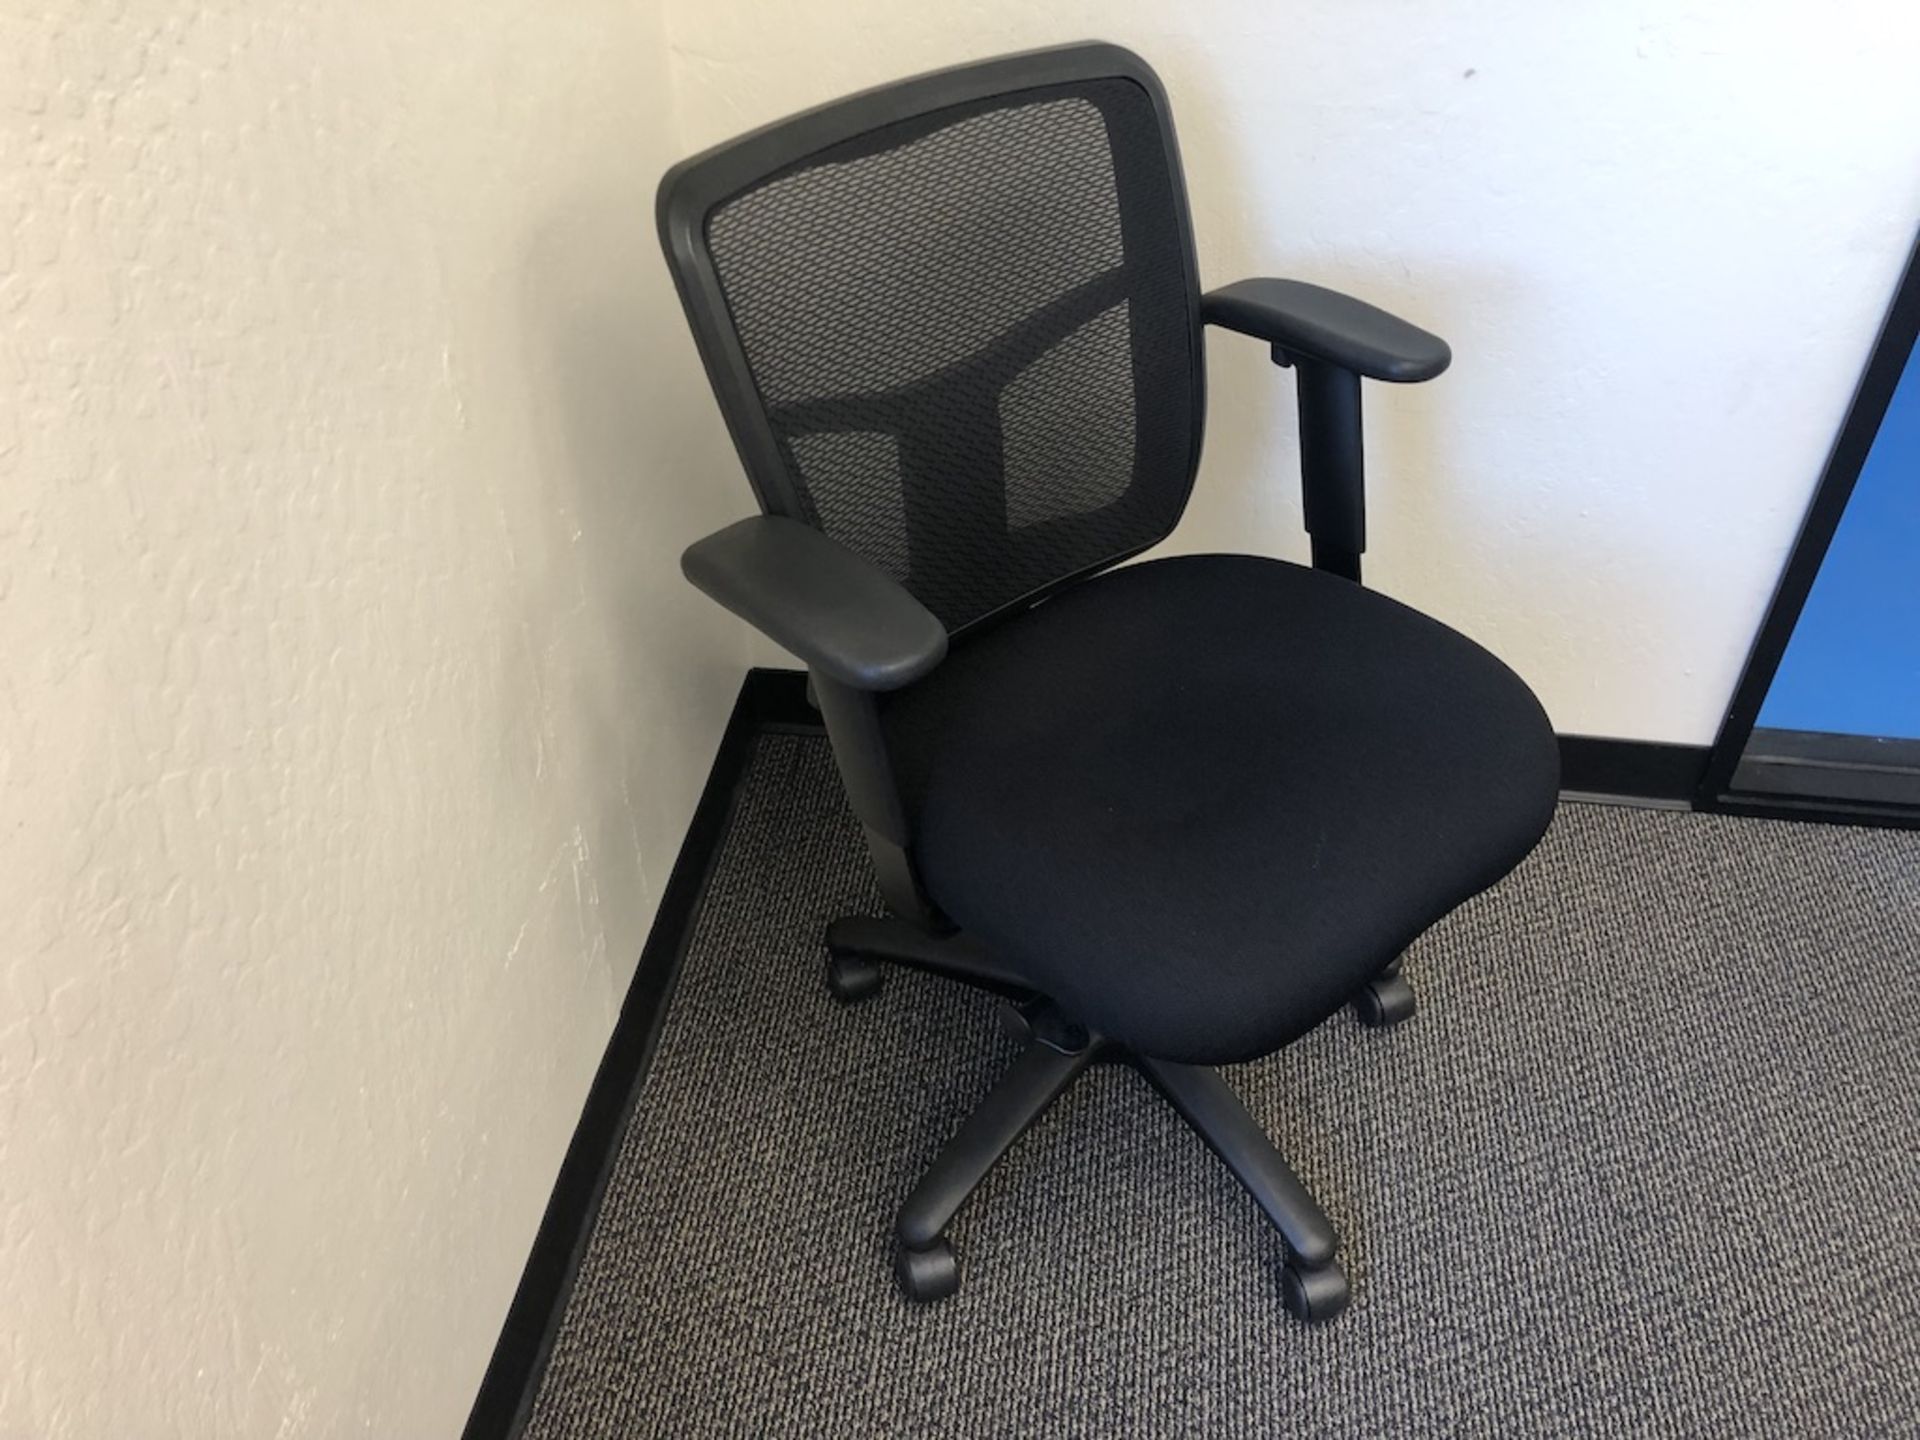 5 CASTER OFFICE CHAIR PADDED ARM REST, BLACK SEAT CUSHION, MESH BACK SUPPORT    SCHNEIDER - Image 2 of 3